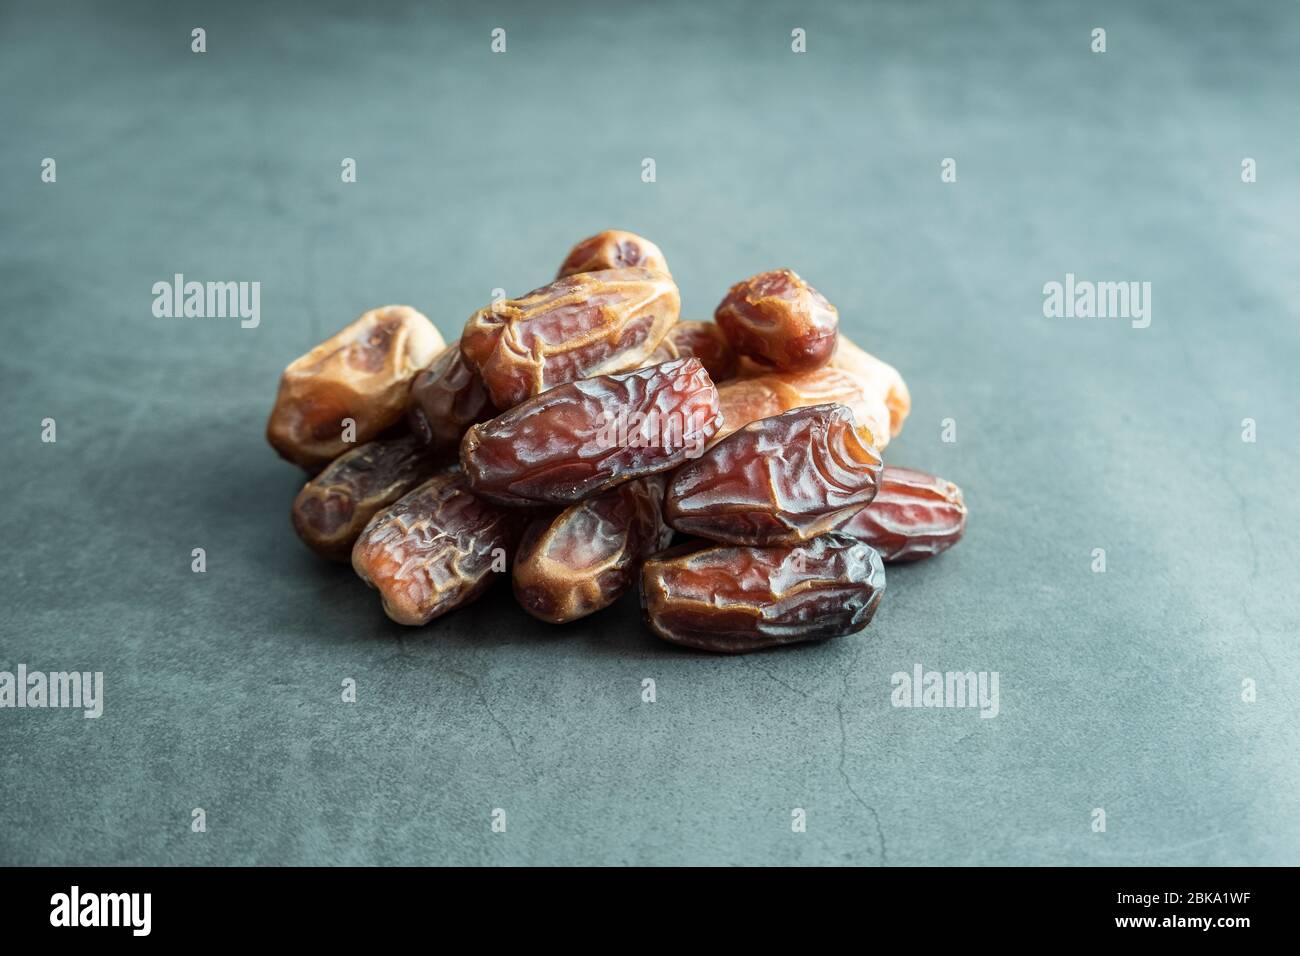 Raw date fruit ready to eat on concrete background. Traditional, delicious and healthy ramadan food. Stock Photo